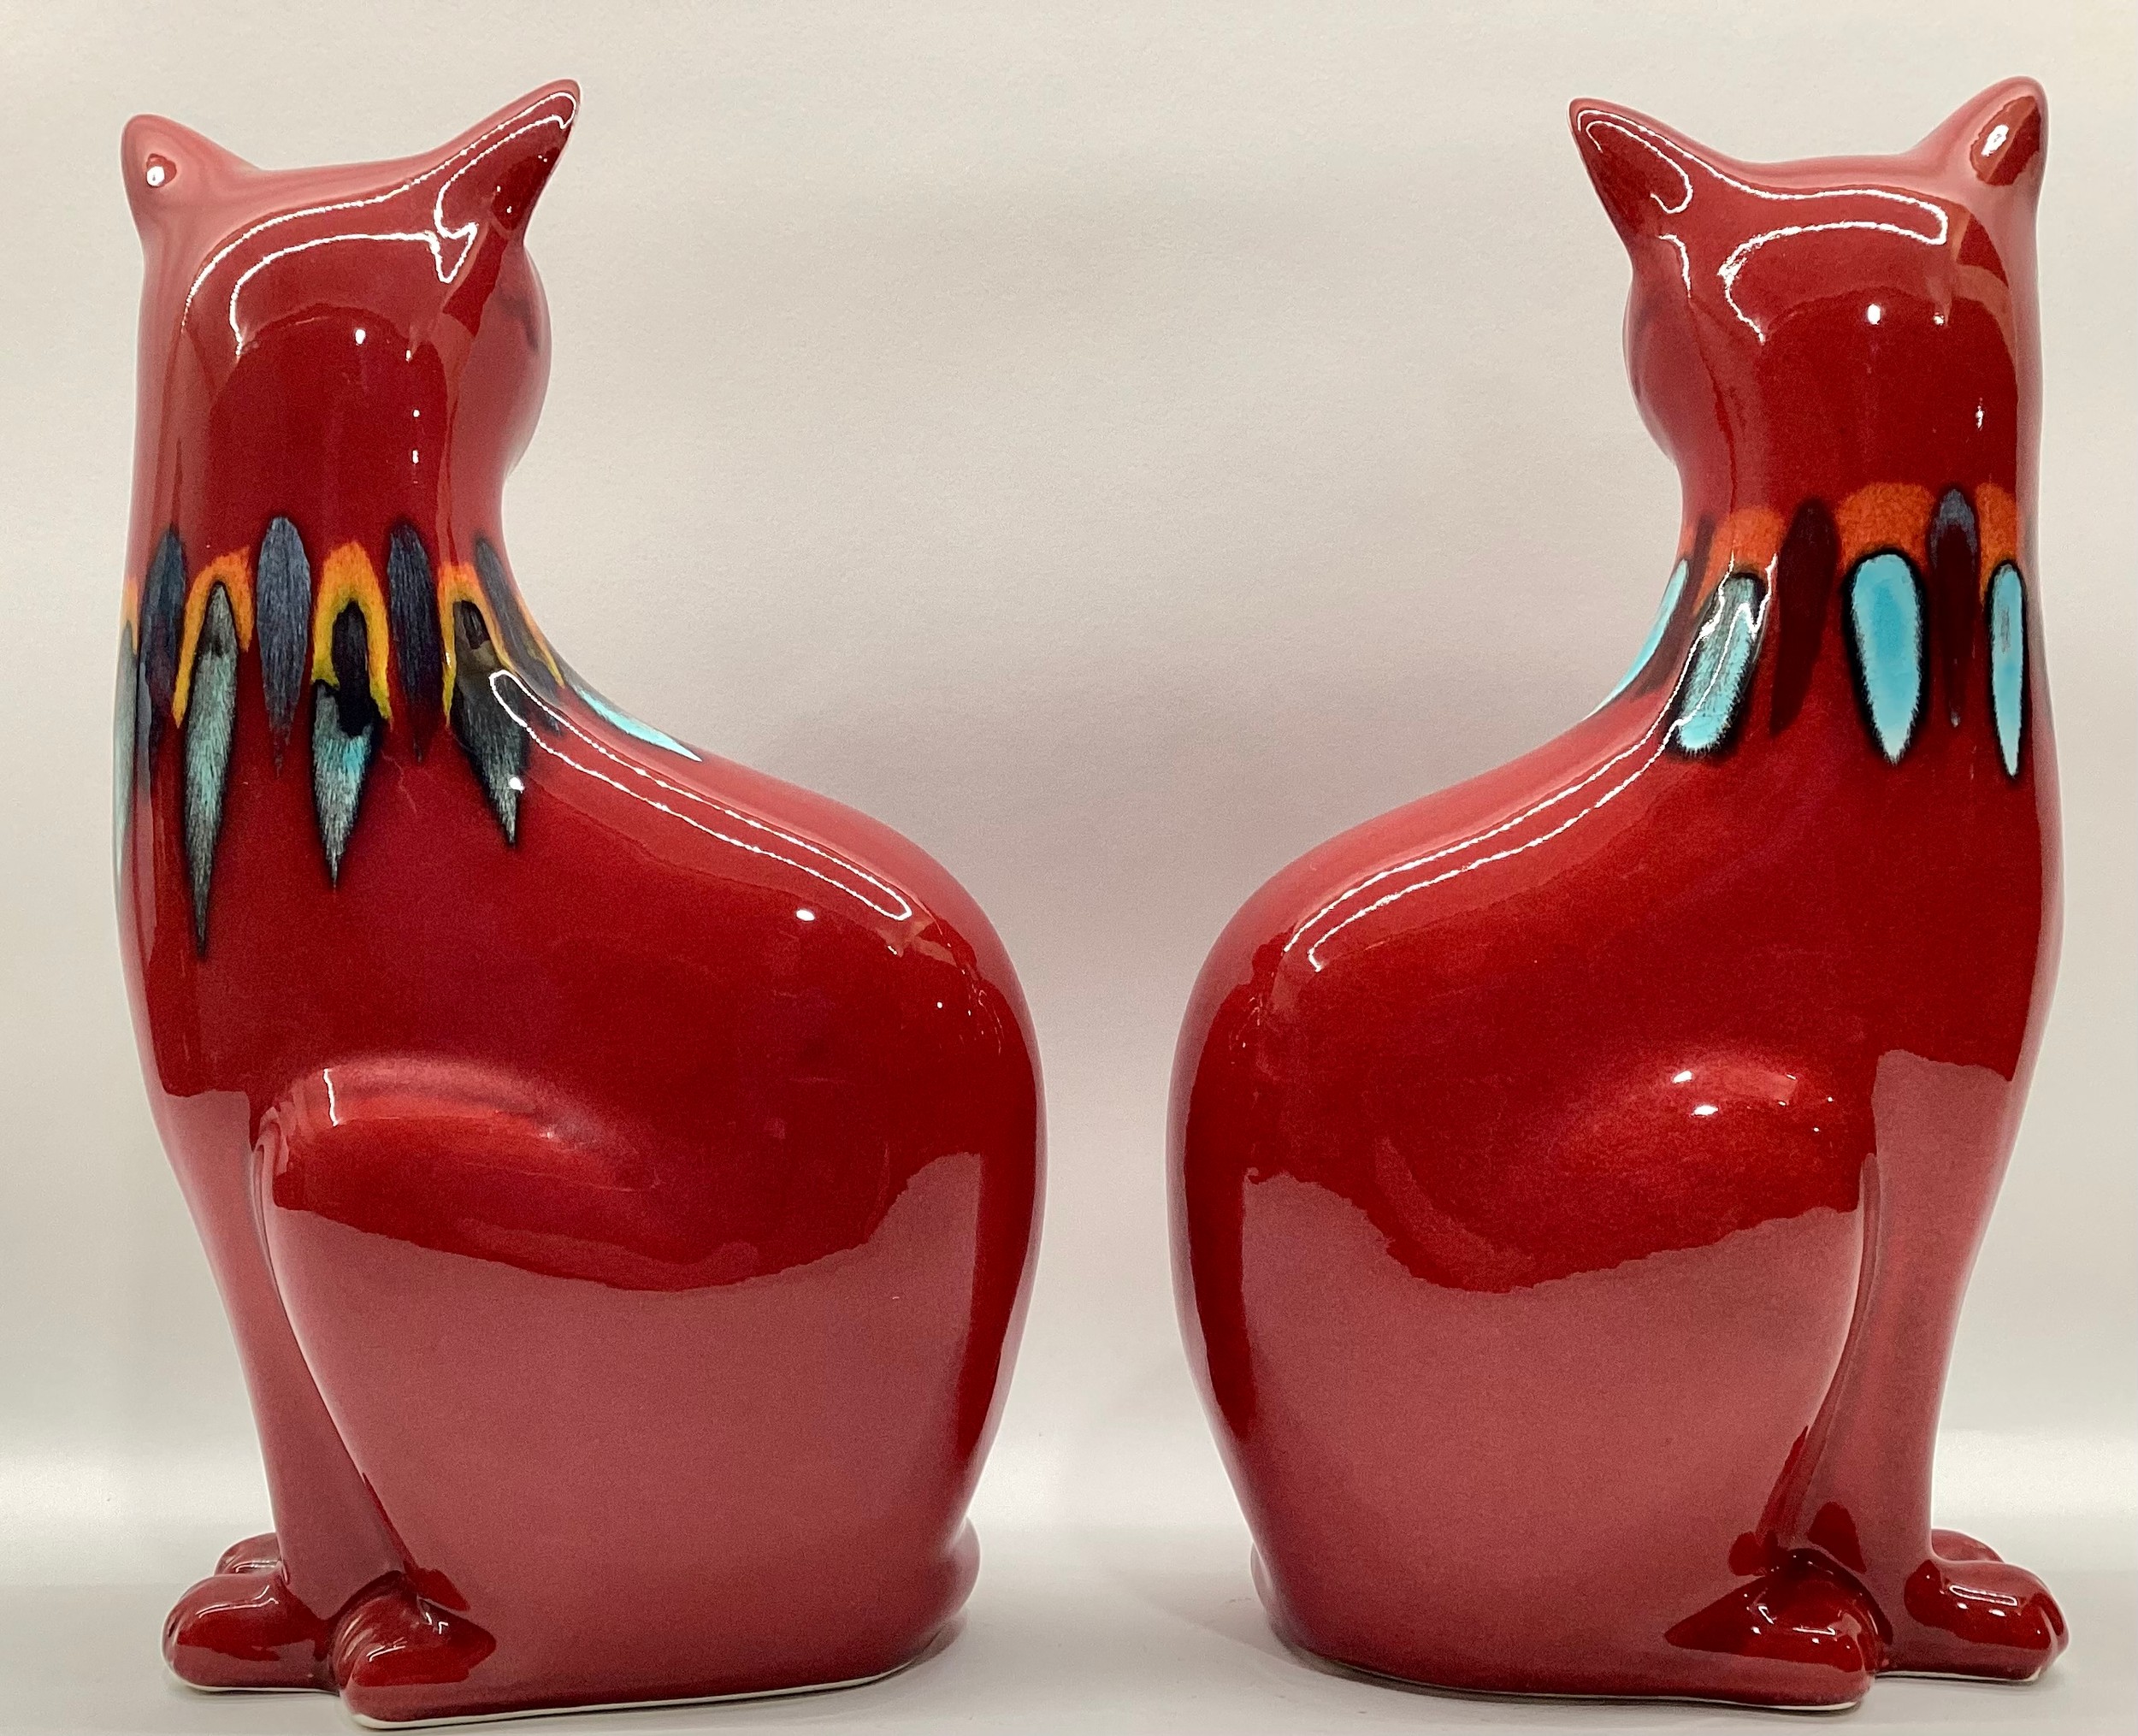 Poole Pottery pair of large living glaze red cats 11.25" high (2) - Image 3 of 4